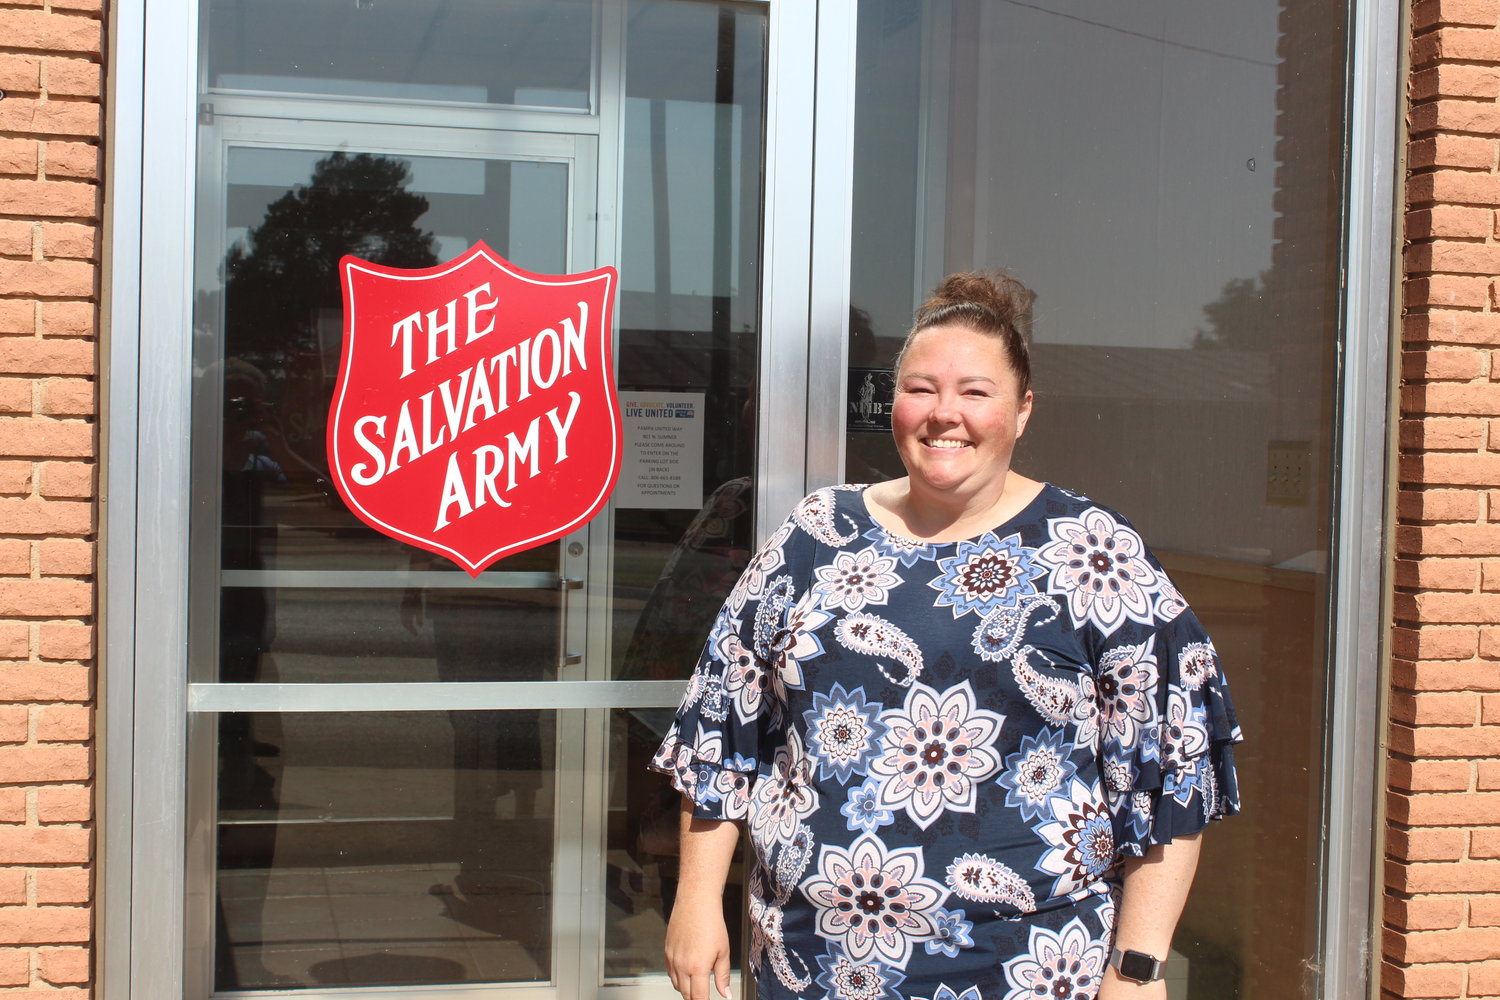 Shelby Huff, the Regional Representative for The Salvation Army, at their new location at 801 N. Sumner.